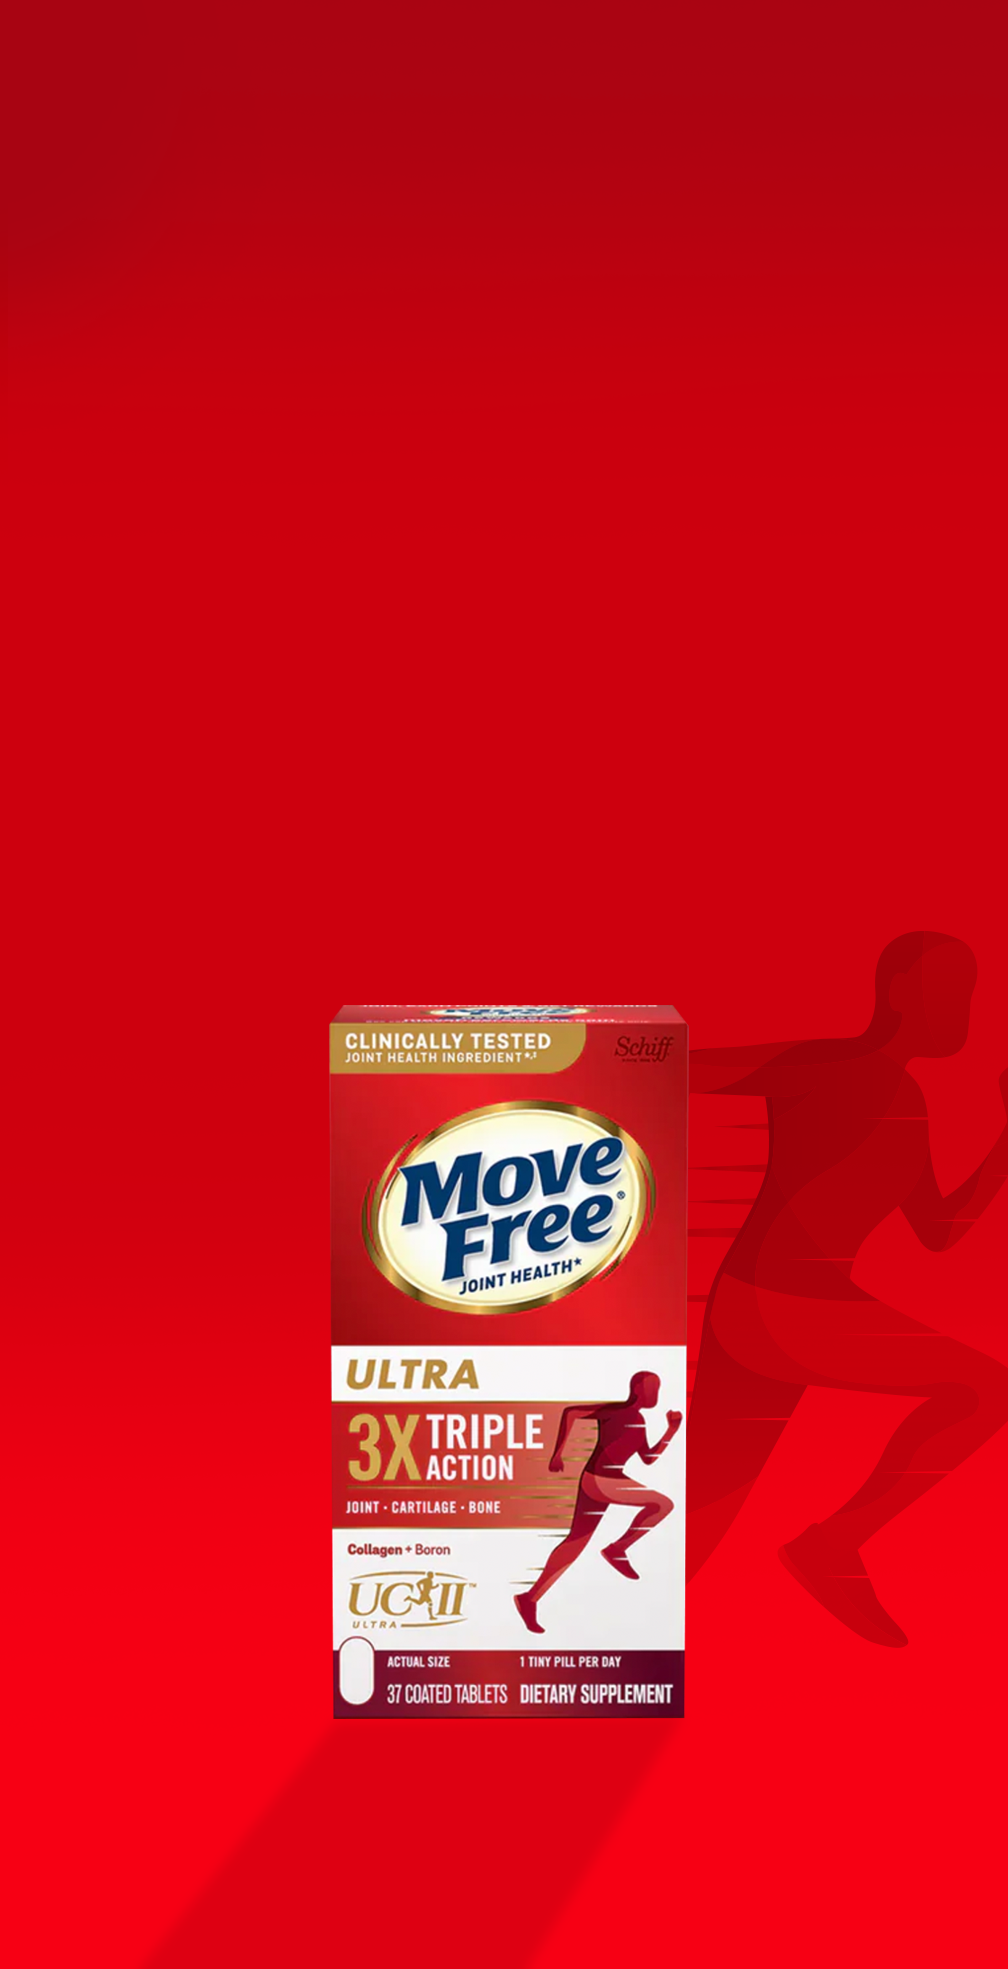 Move free Banner- Shop Move Free Ultra and get $5 Walmart cash 